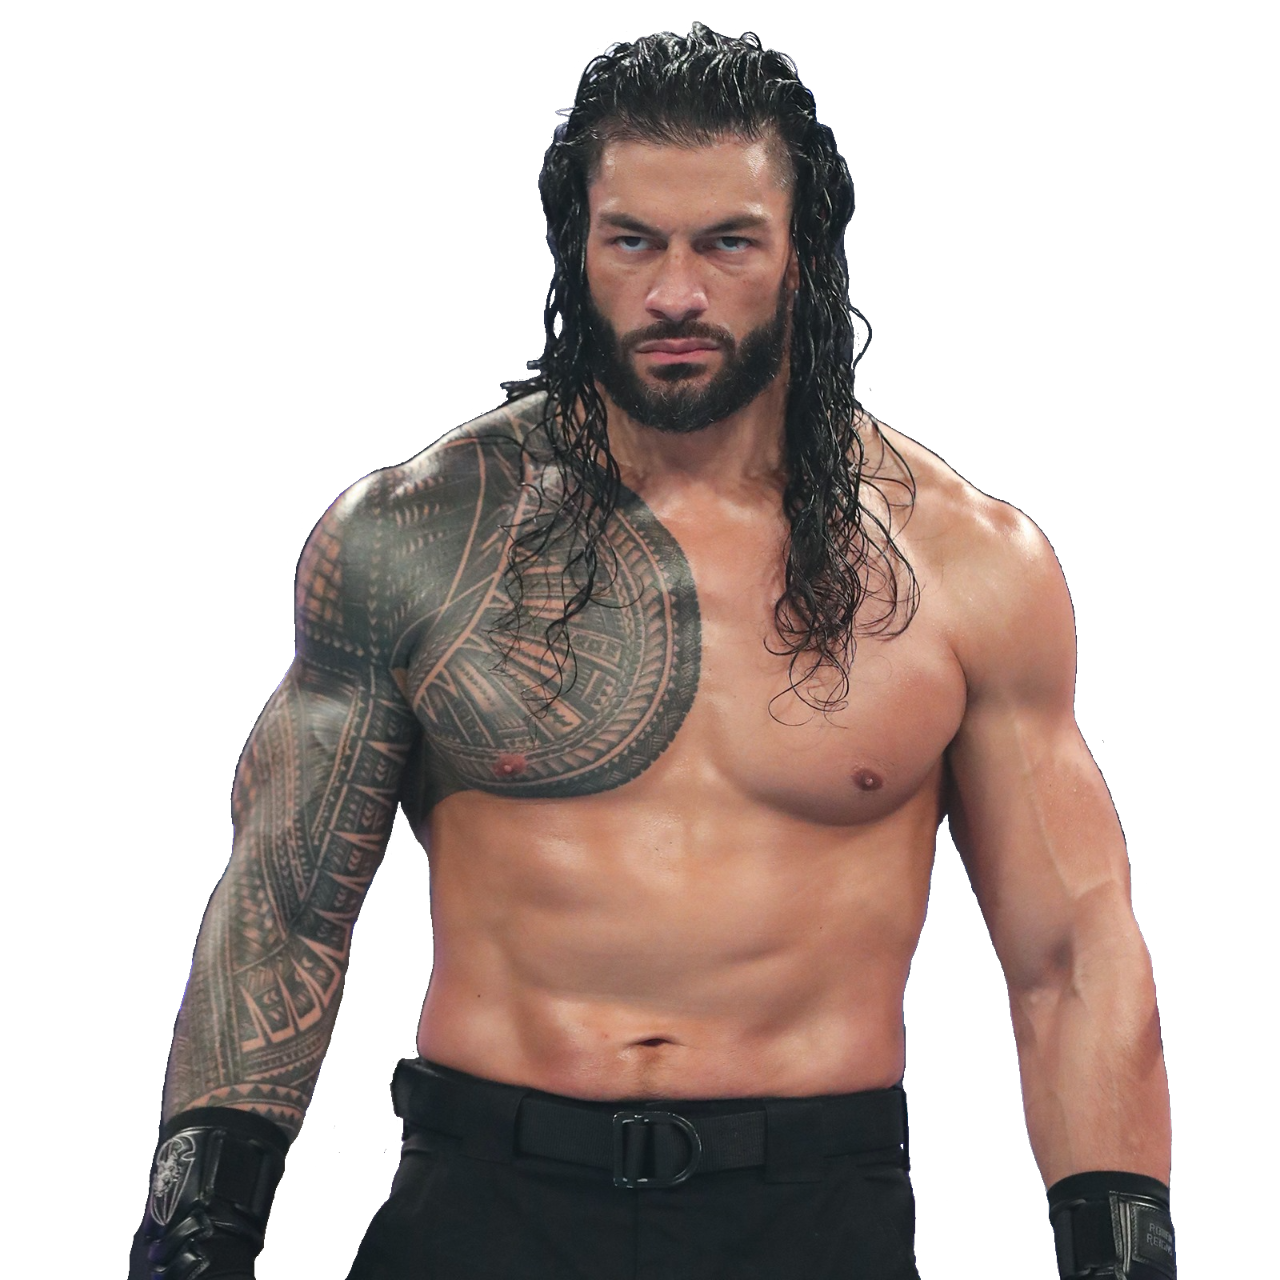 My simple 5 step booking plan to get Roman Reigns cheered